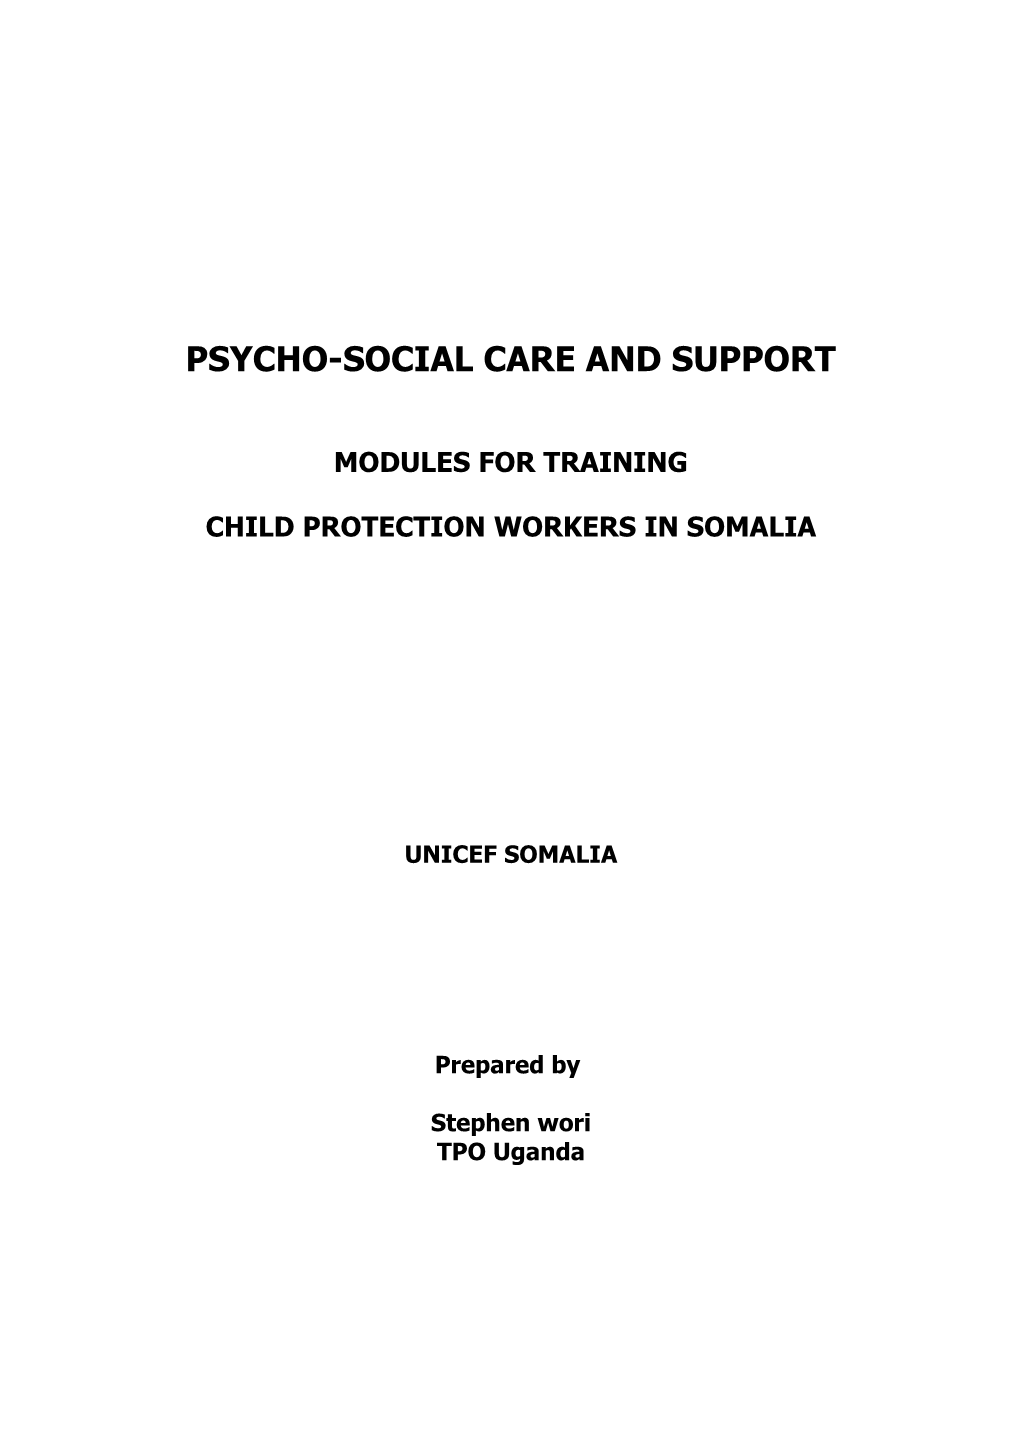 Psycho-Social Care and Support